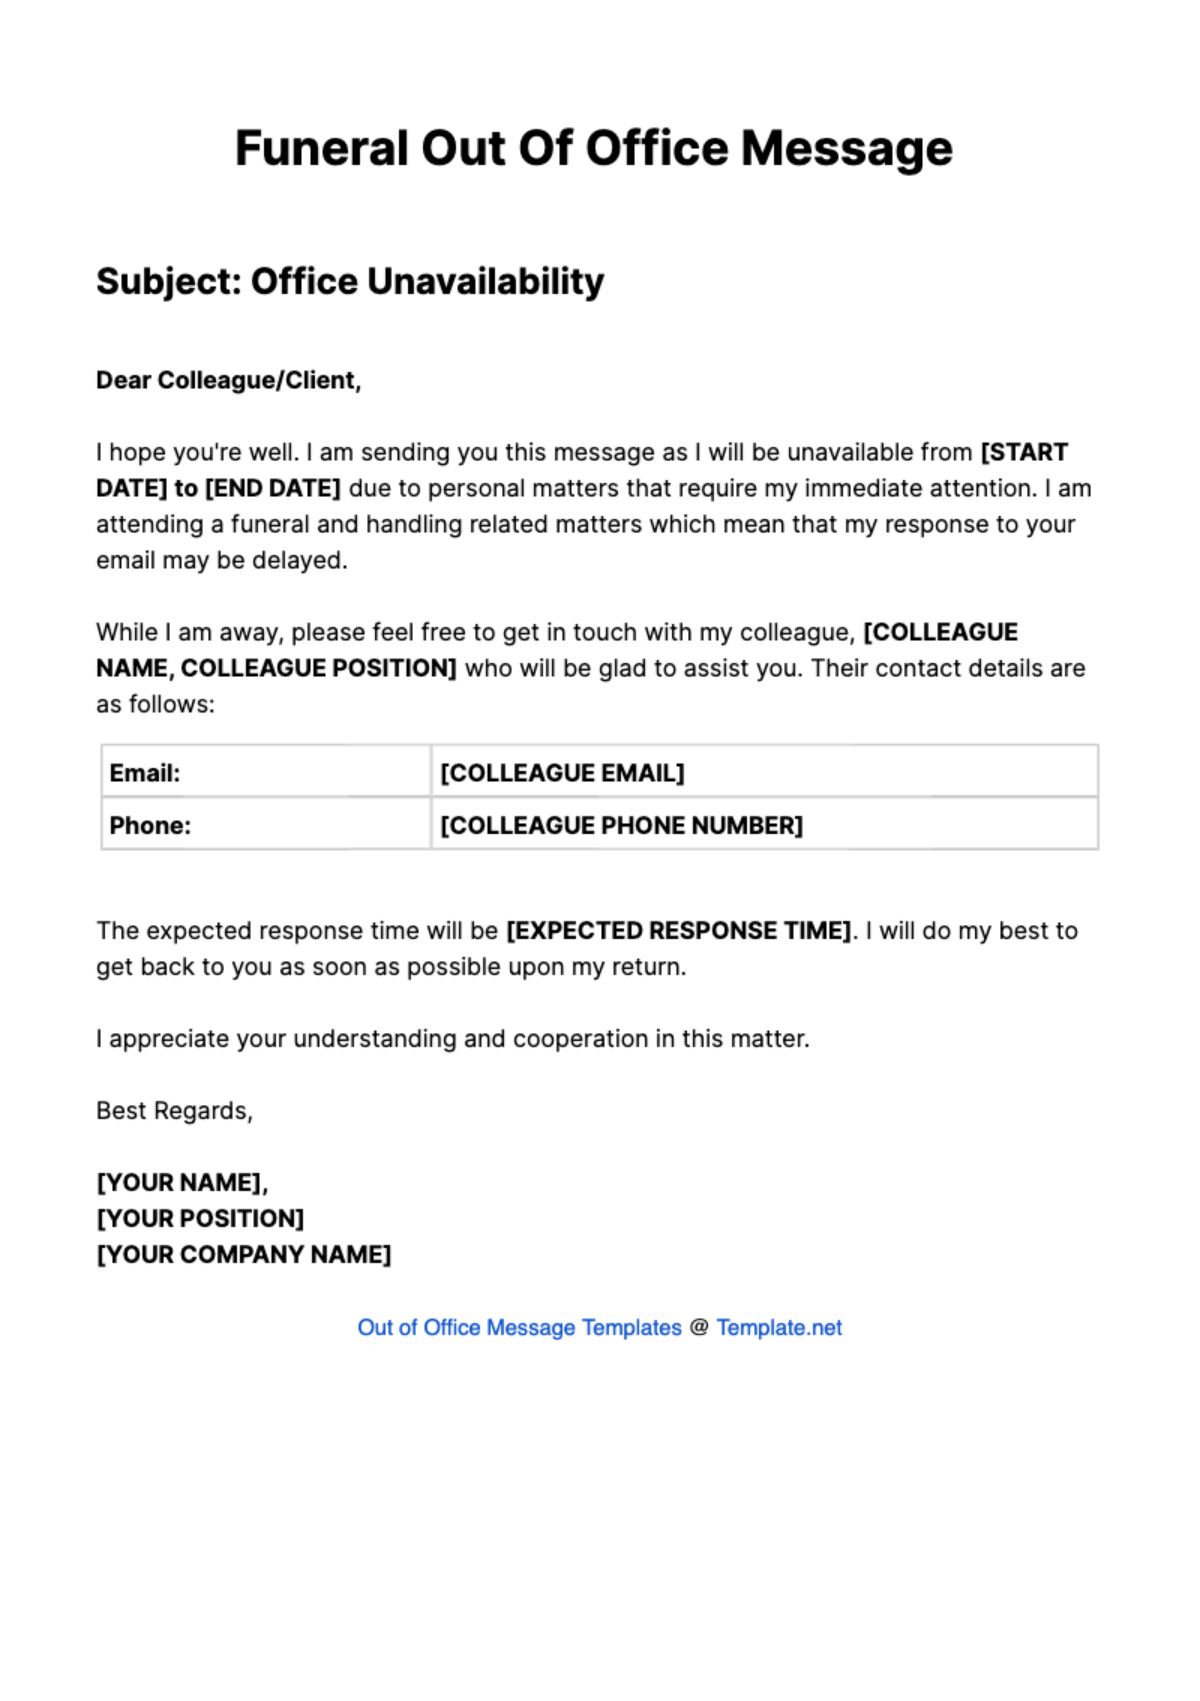 Funeral Out Of Office Message Template